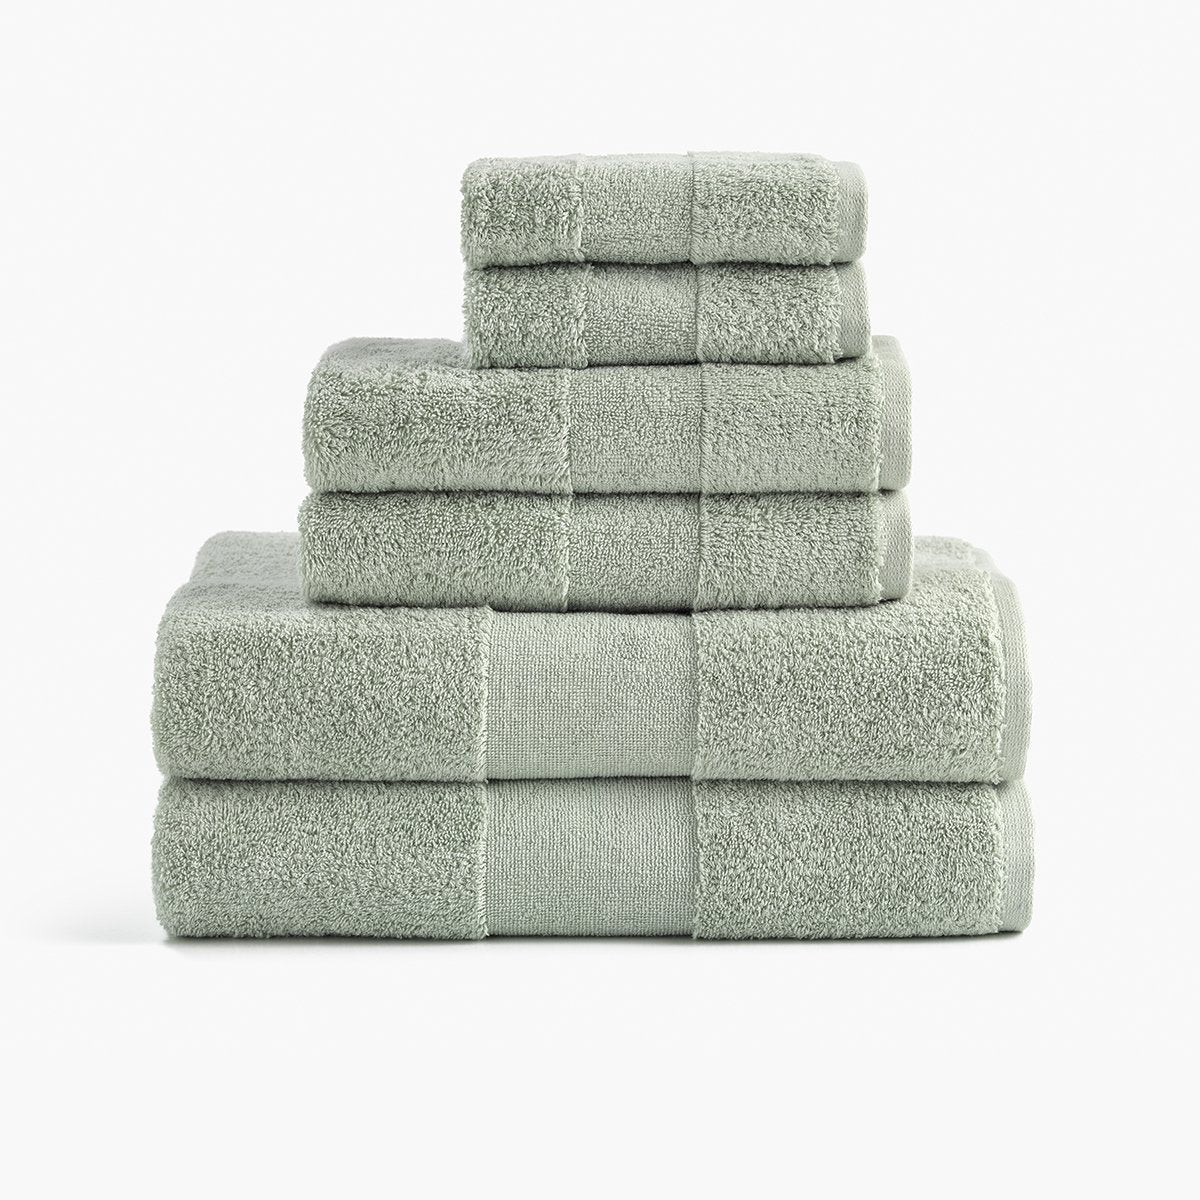 Plush Organic Towel in Pale Sage by Under The Canopy